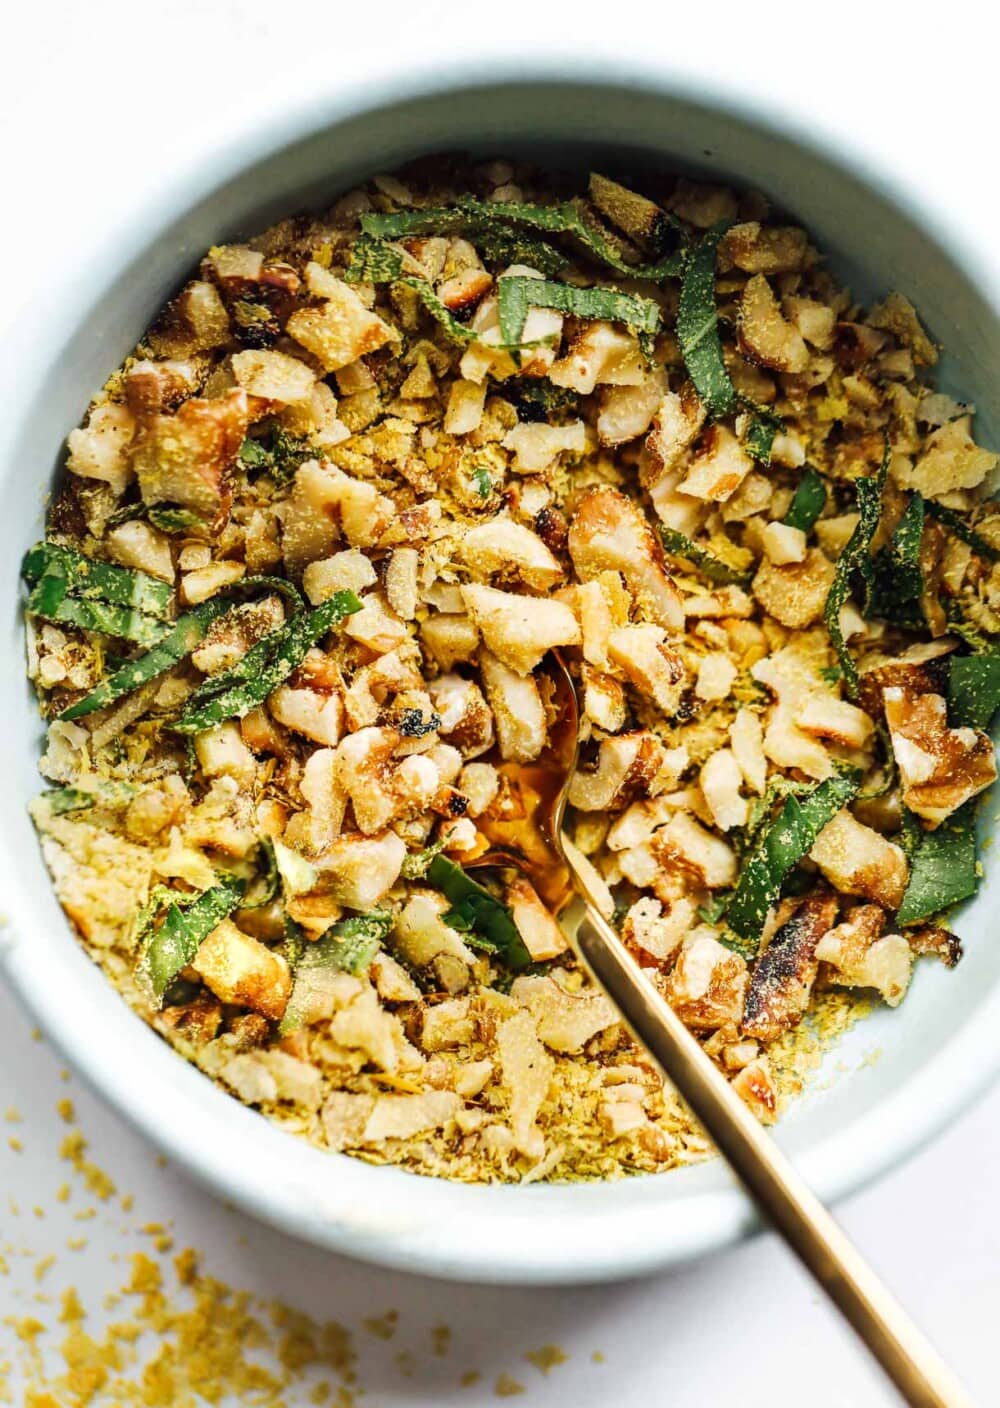 nutritional yeast crunch in a blue bowl with gold spoon